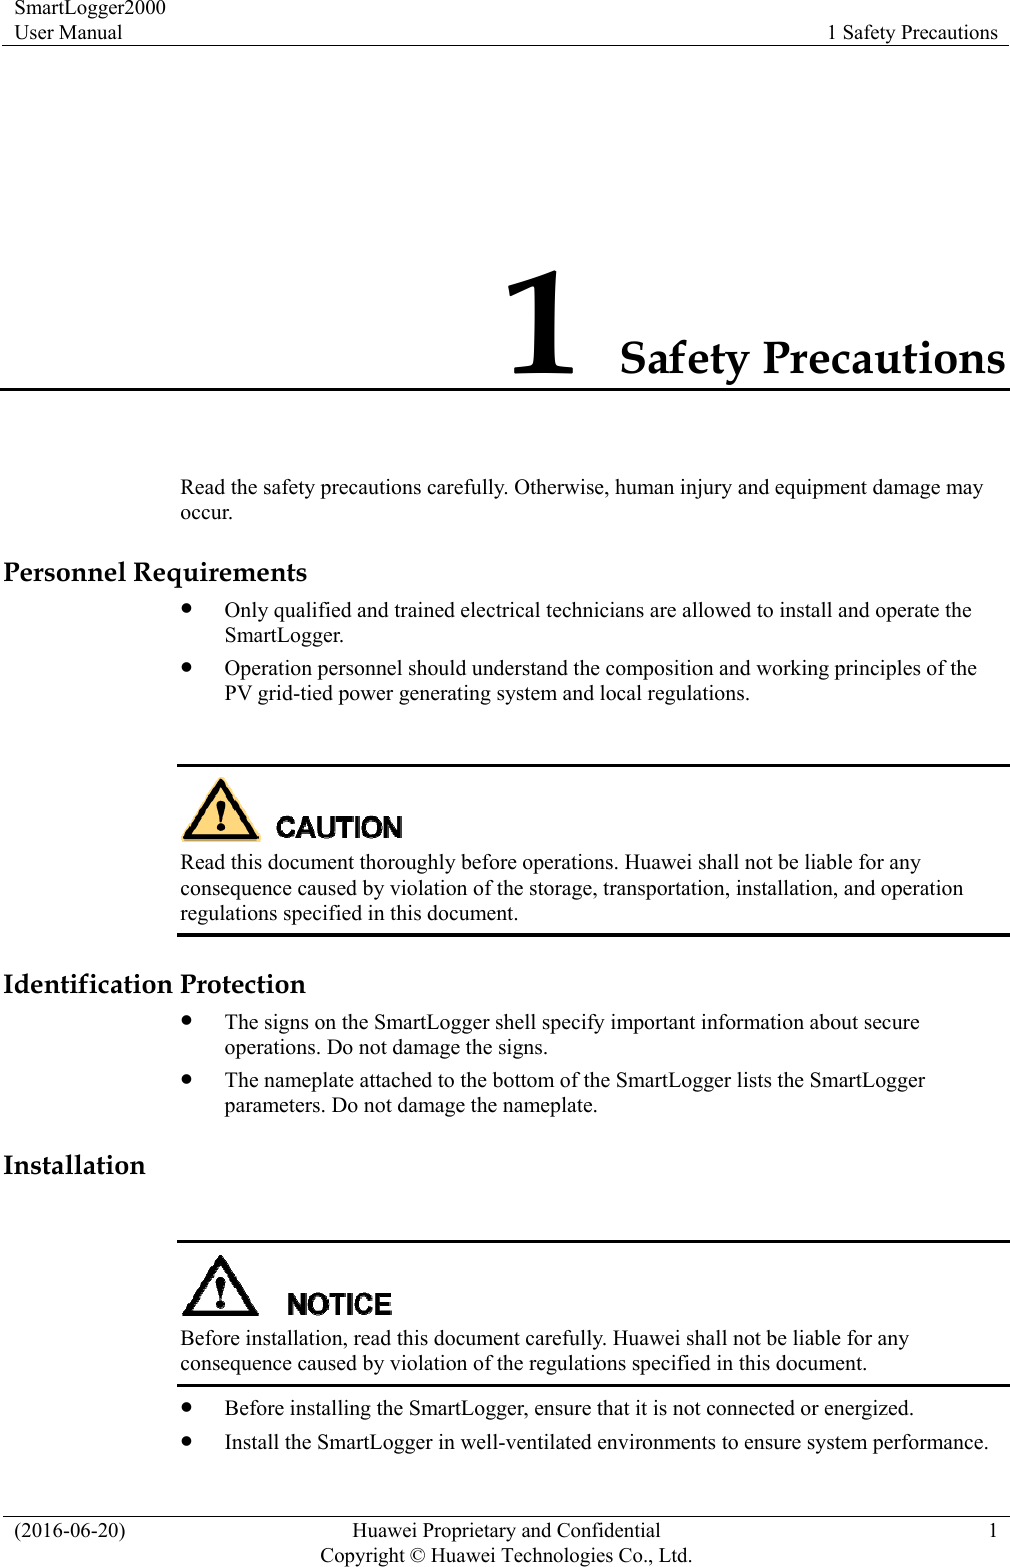 SmartLogger2000 User Manual  1 Safety Precautions (2016-06-20)  Huawei Proprietary and Confidential         Copyright © Huawei Technologies Co., Ltd.1 1 Safety Precautions Read the safety precautions carefully. Otherwise, human injury and equipment damage may occur. Personnel Requirements  Only qualified and trained electrical technicians are allowed to install and operate the SmartLogger.  Operation personnel should understand the composition and working principles of the PV grid-tied power generating system and local regulations.   Read this document thoroughly before operations. Huawei shall not be liable for any consequence caused by violation of the storage, transportation, installation, and operation regulations specified in this document. Identification Protection  The signs on the SmartLogger shell specify important information about secure operations. Do not damage the signs.  The nameplate attached to the bottom of the SmartLogger lists the SmartLogger parameters. Do not damage the nameplate. Installation   Before installation, read this document carefully. Huawei shall not be liable for any consequence caused by violation of the regulations specified in this document.  Before installing the SmartLogger, ensure that it is not connected or energized.  Install the SmartLogger in well-ventilated environments to ensure system performance. 